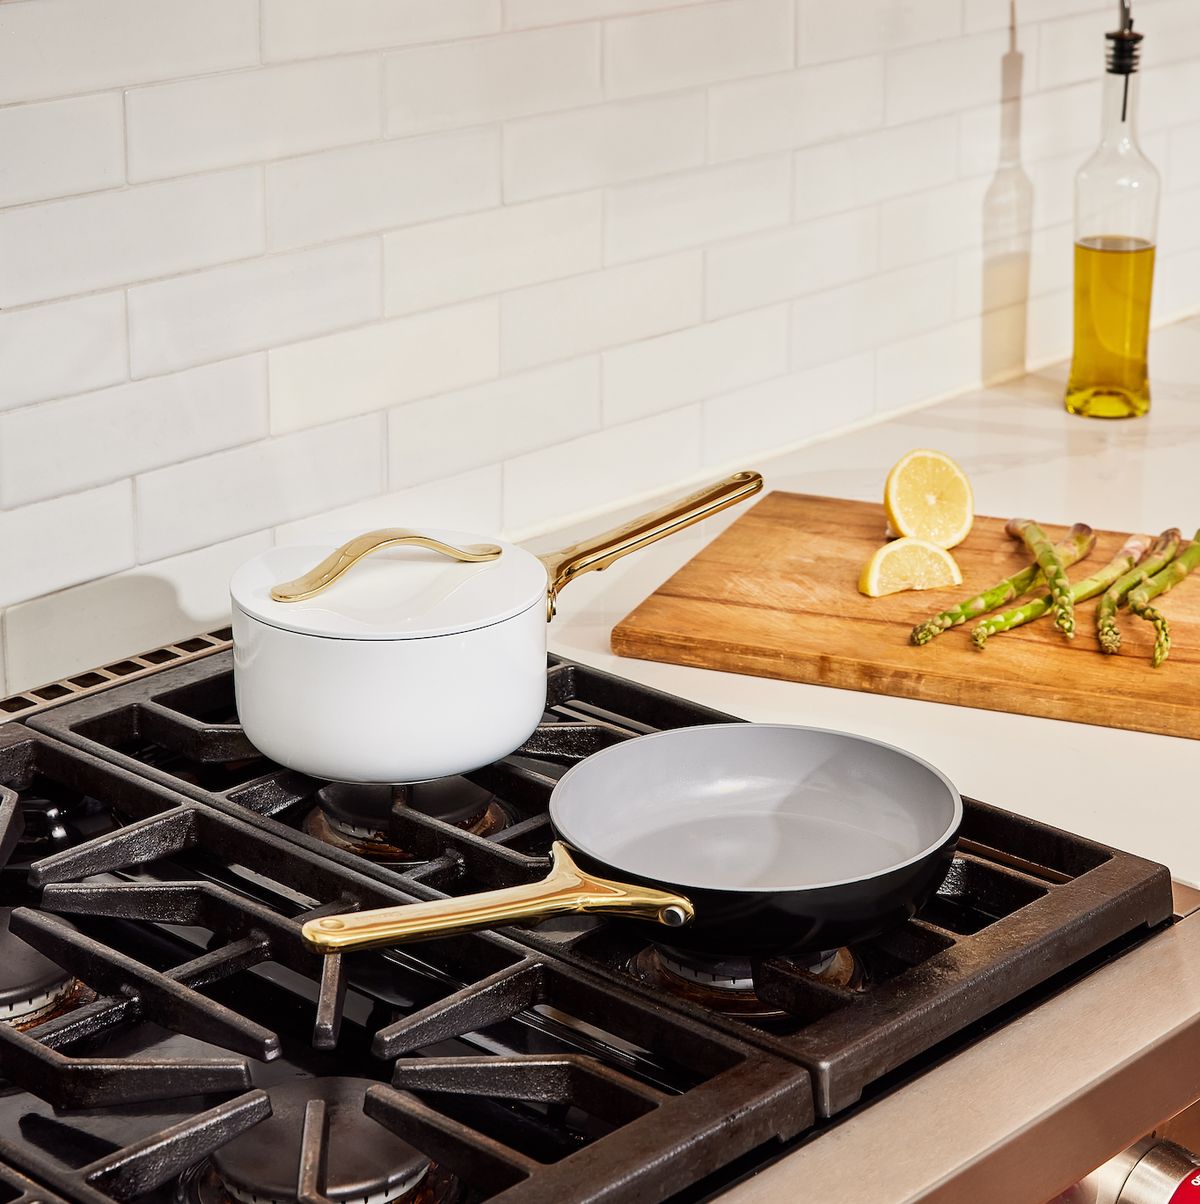 Caraway Cookware Minis Collection 2022: Shop and Get Details Here